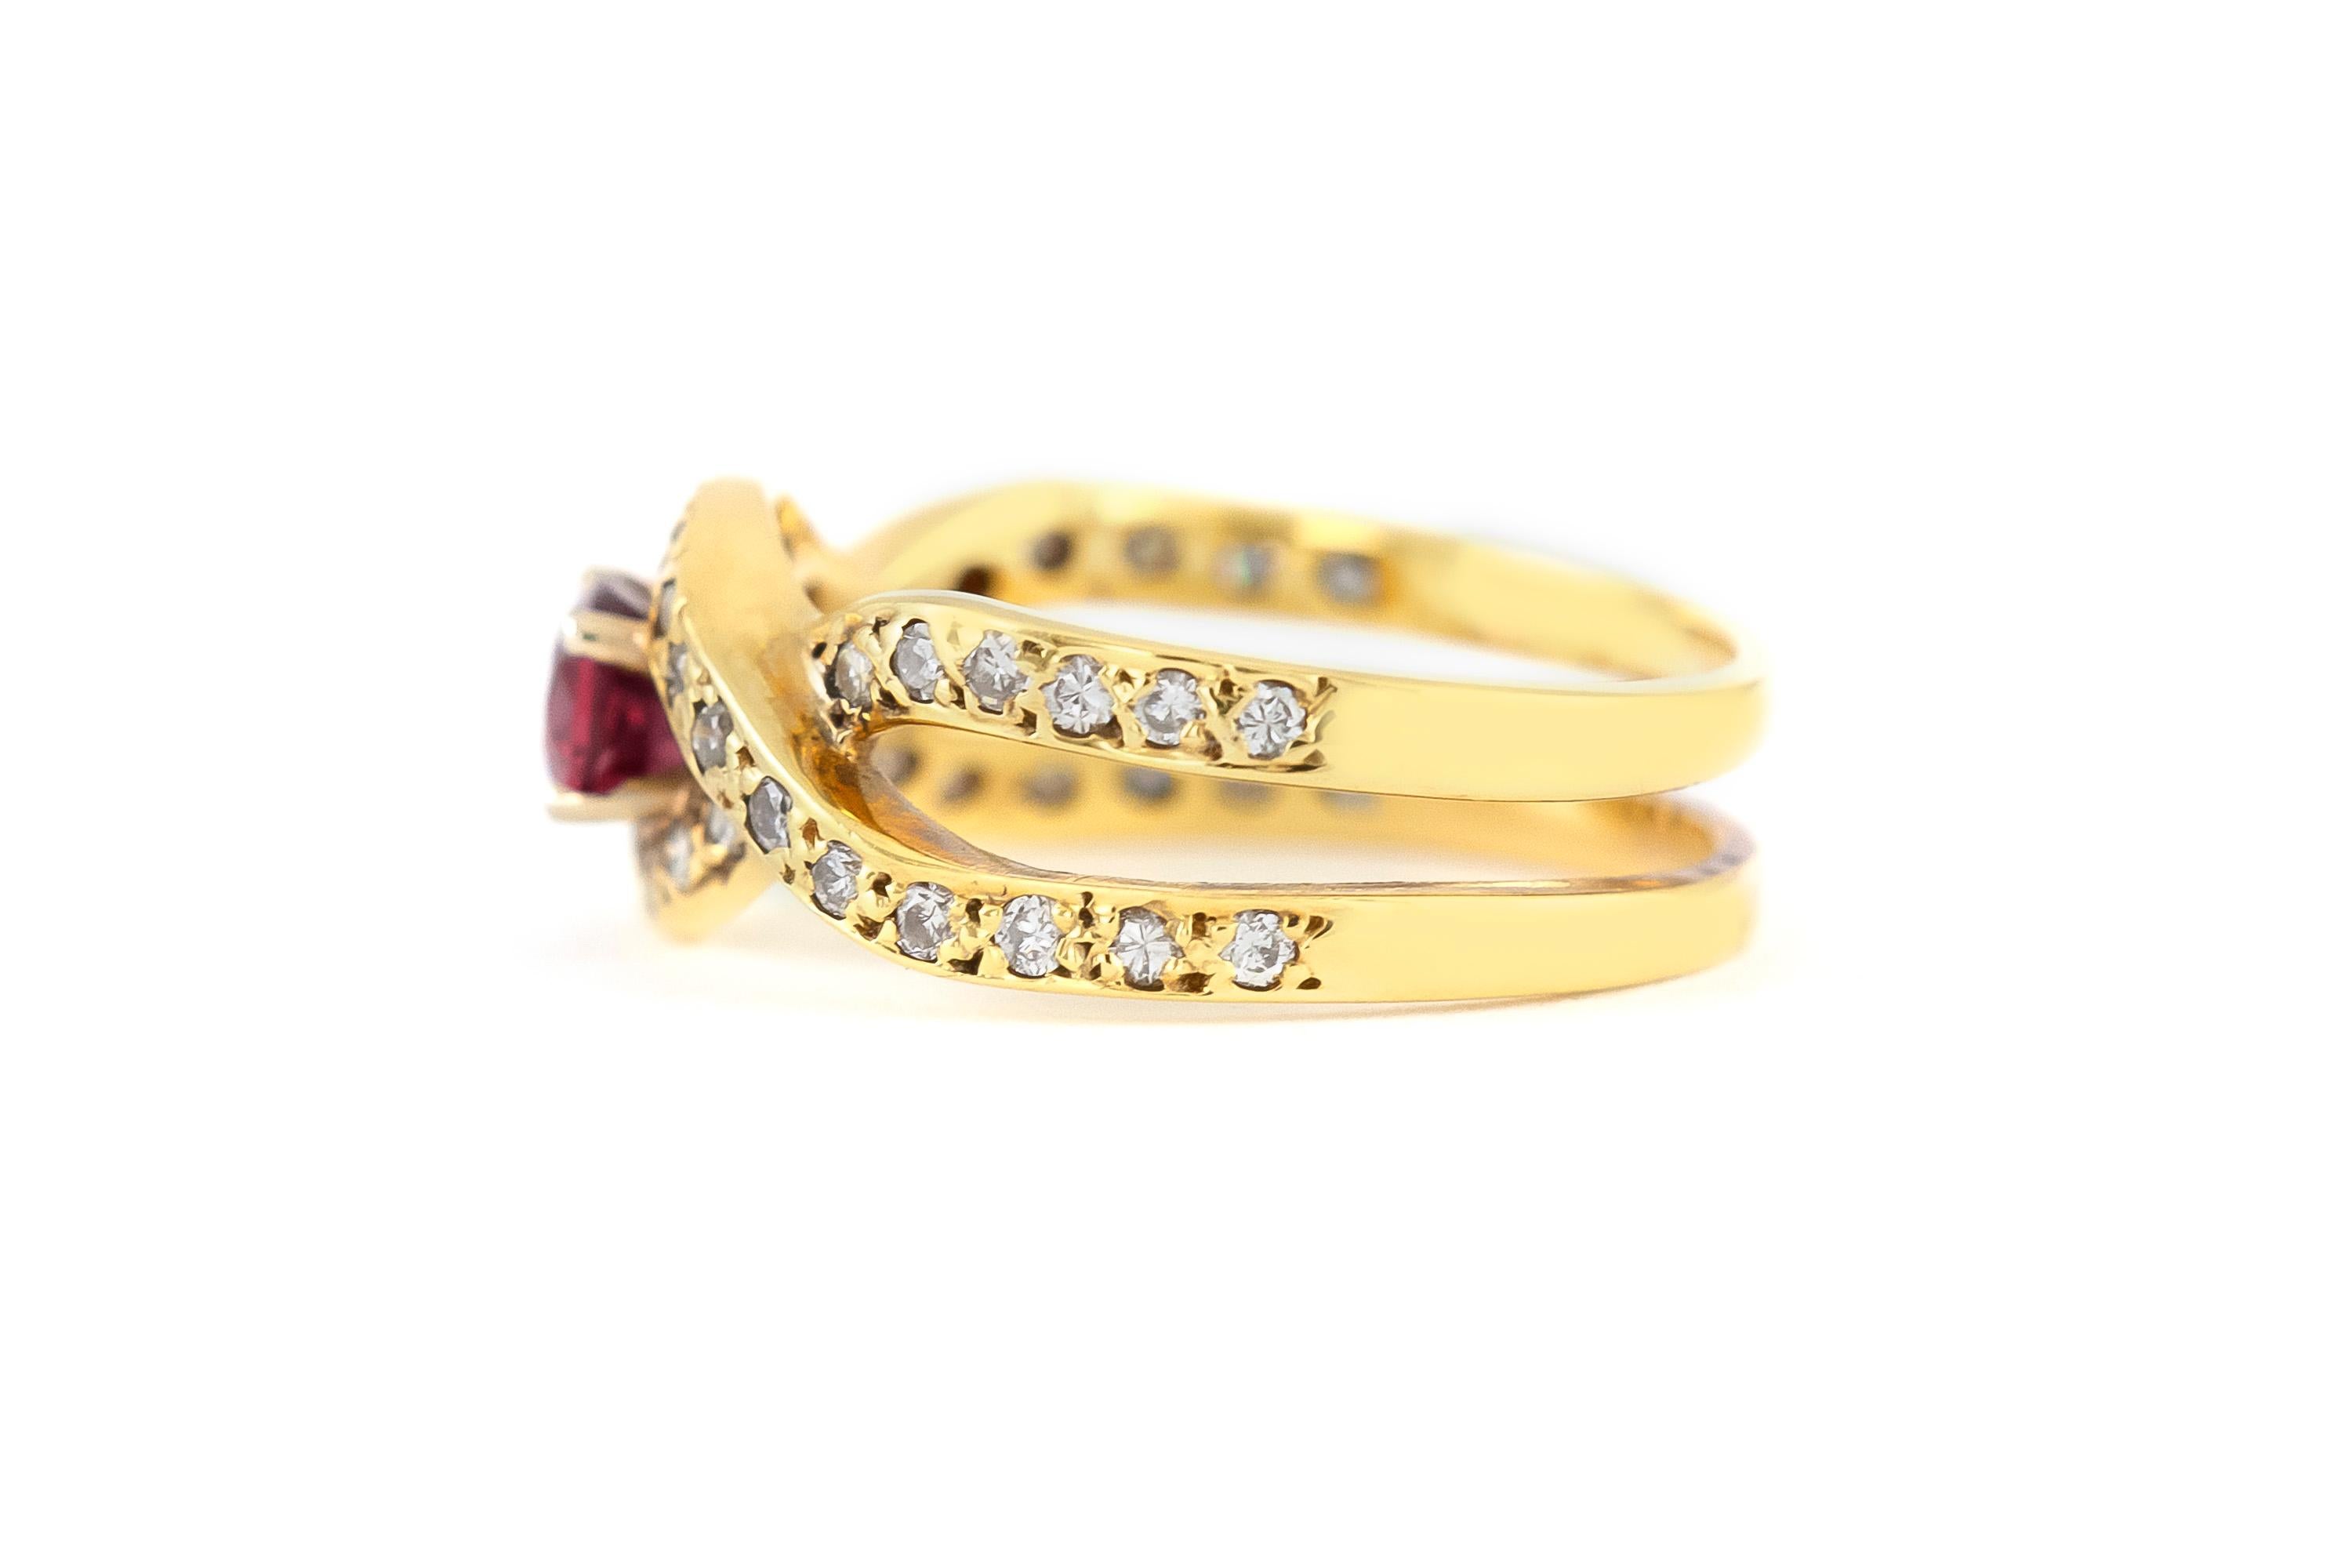 The ring is finely crafted in 14k yellow gold with center pink sapphire weighing approximately total of 0.75 and diamonds on the setting weighing approximately total of 0.35 carat.
Circa 1980.